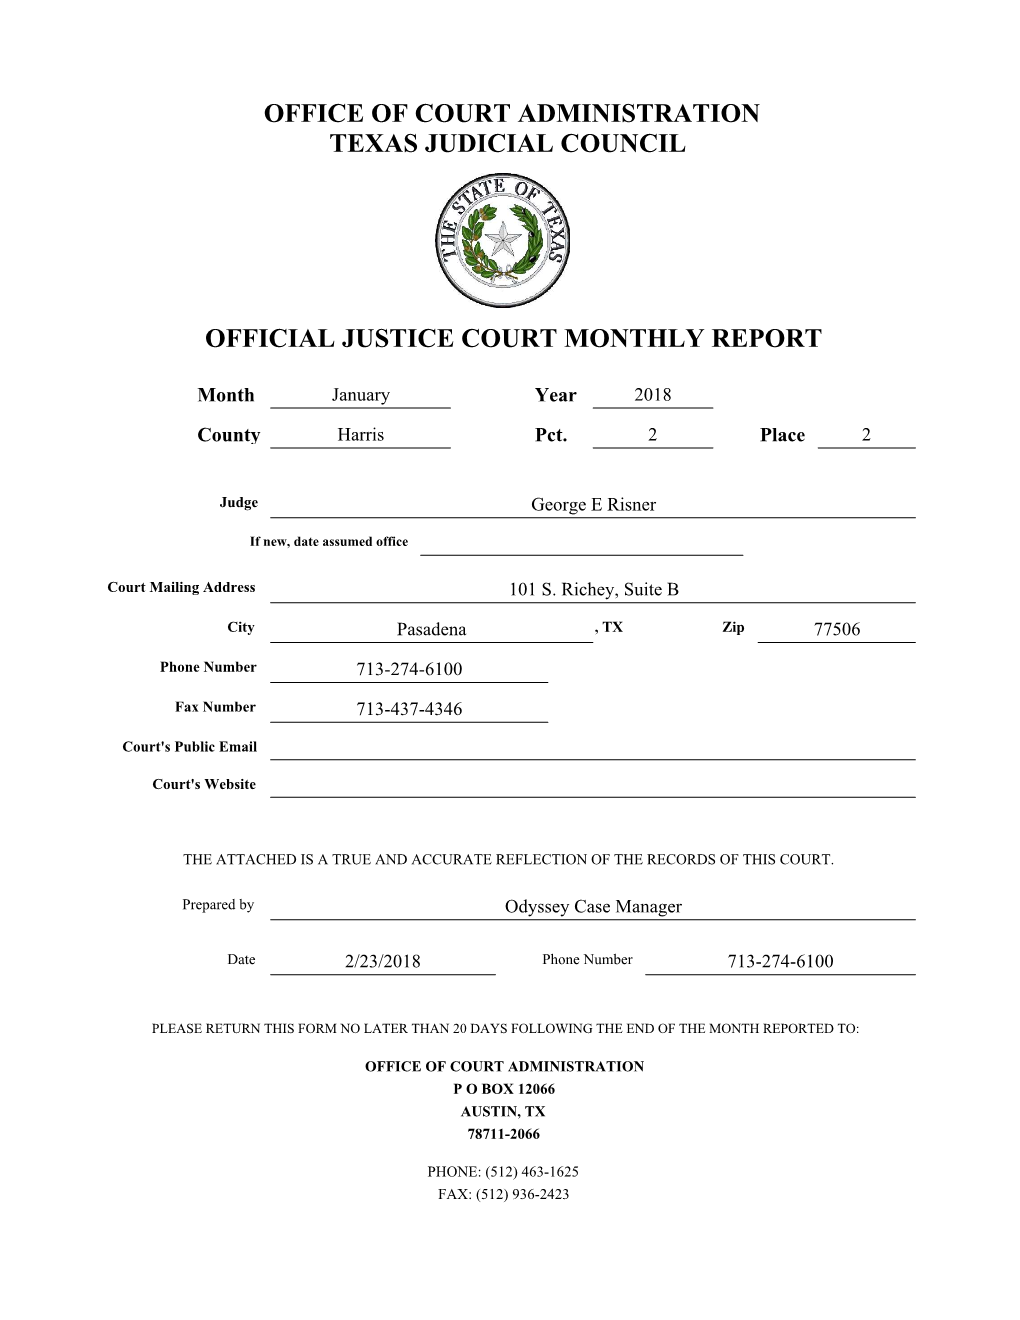 Office of Court Administration Texas Judicial Council Official Justice Court Monthly Report